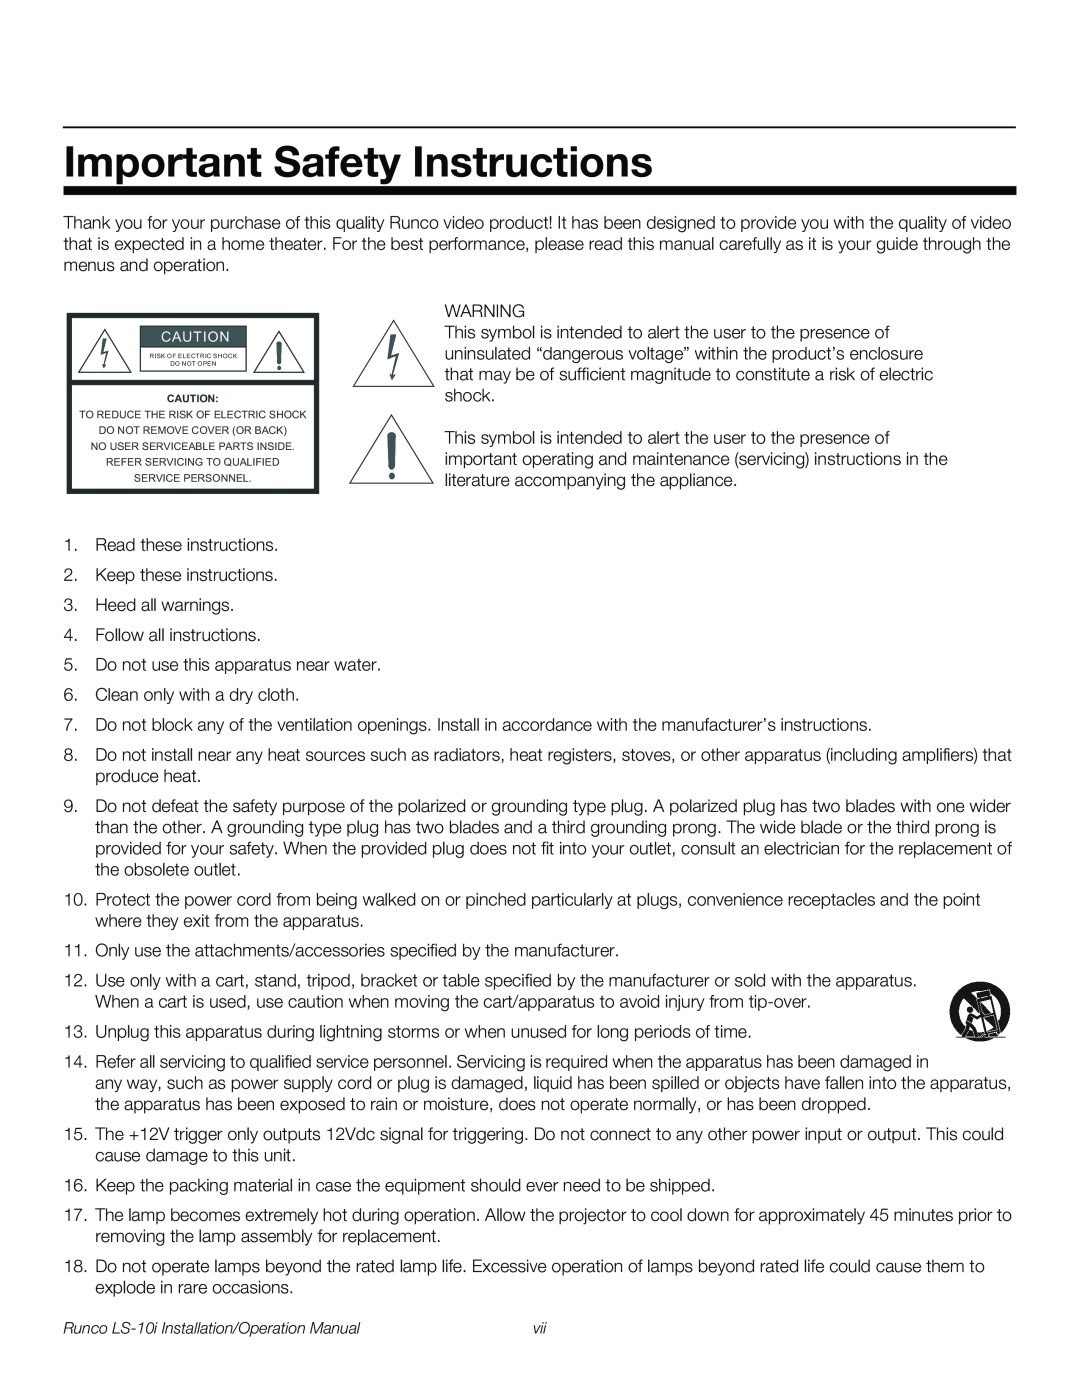 Runco LS-10I operation manual Important Safety Instructions 